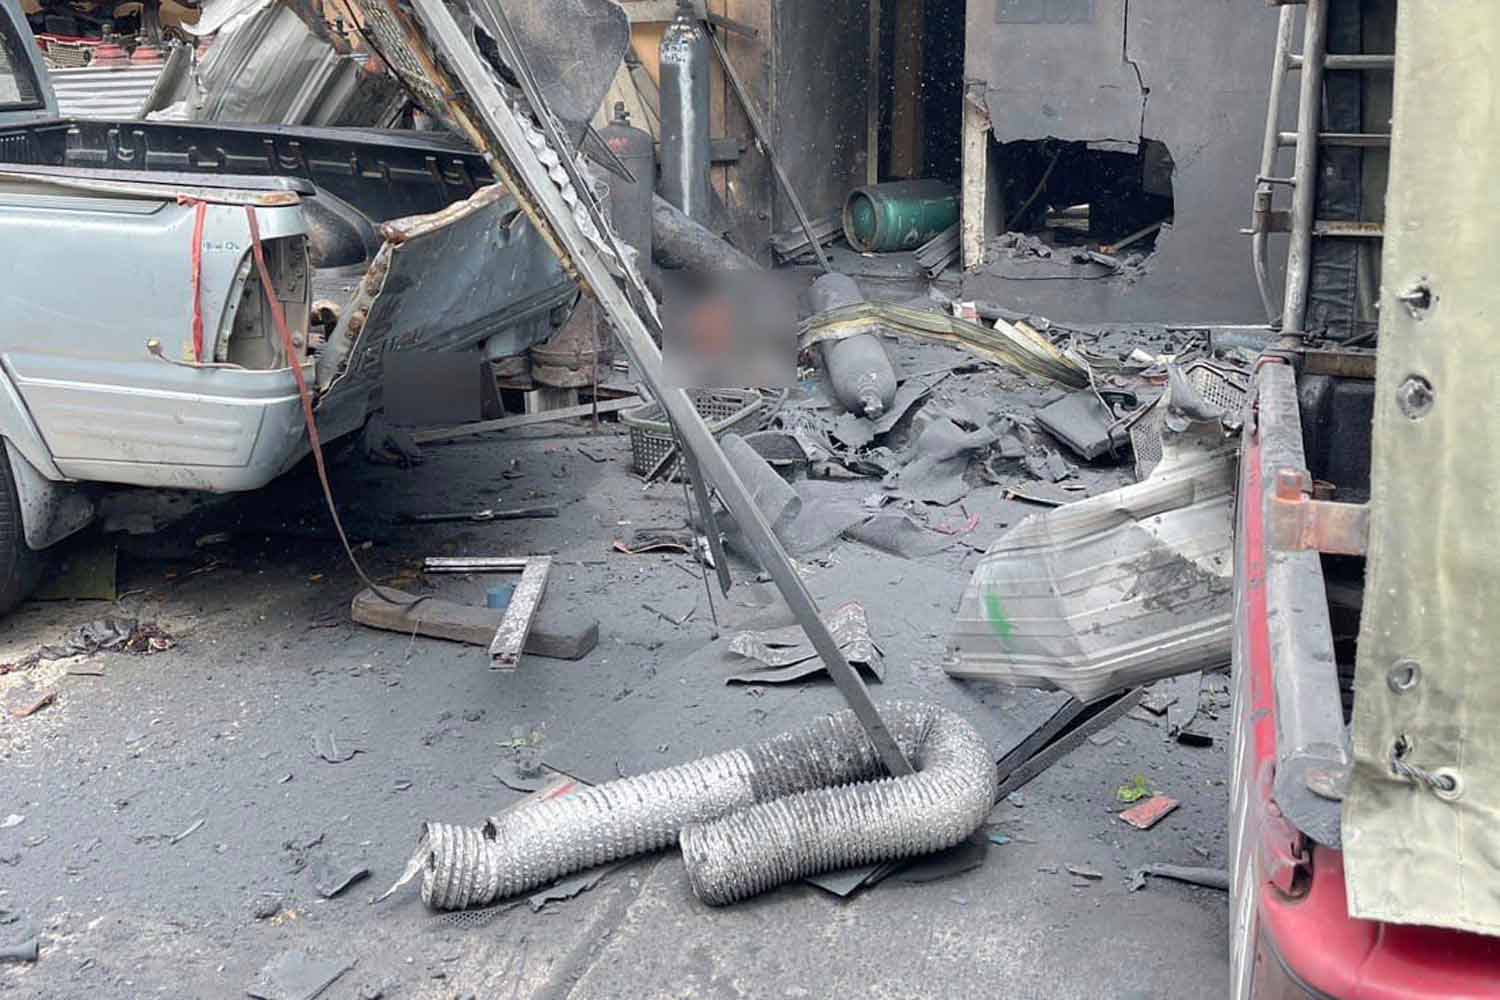 Gas cylinder explosion kills man at home used for storage